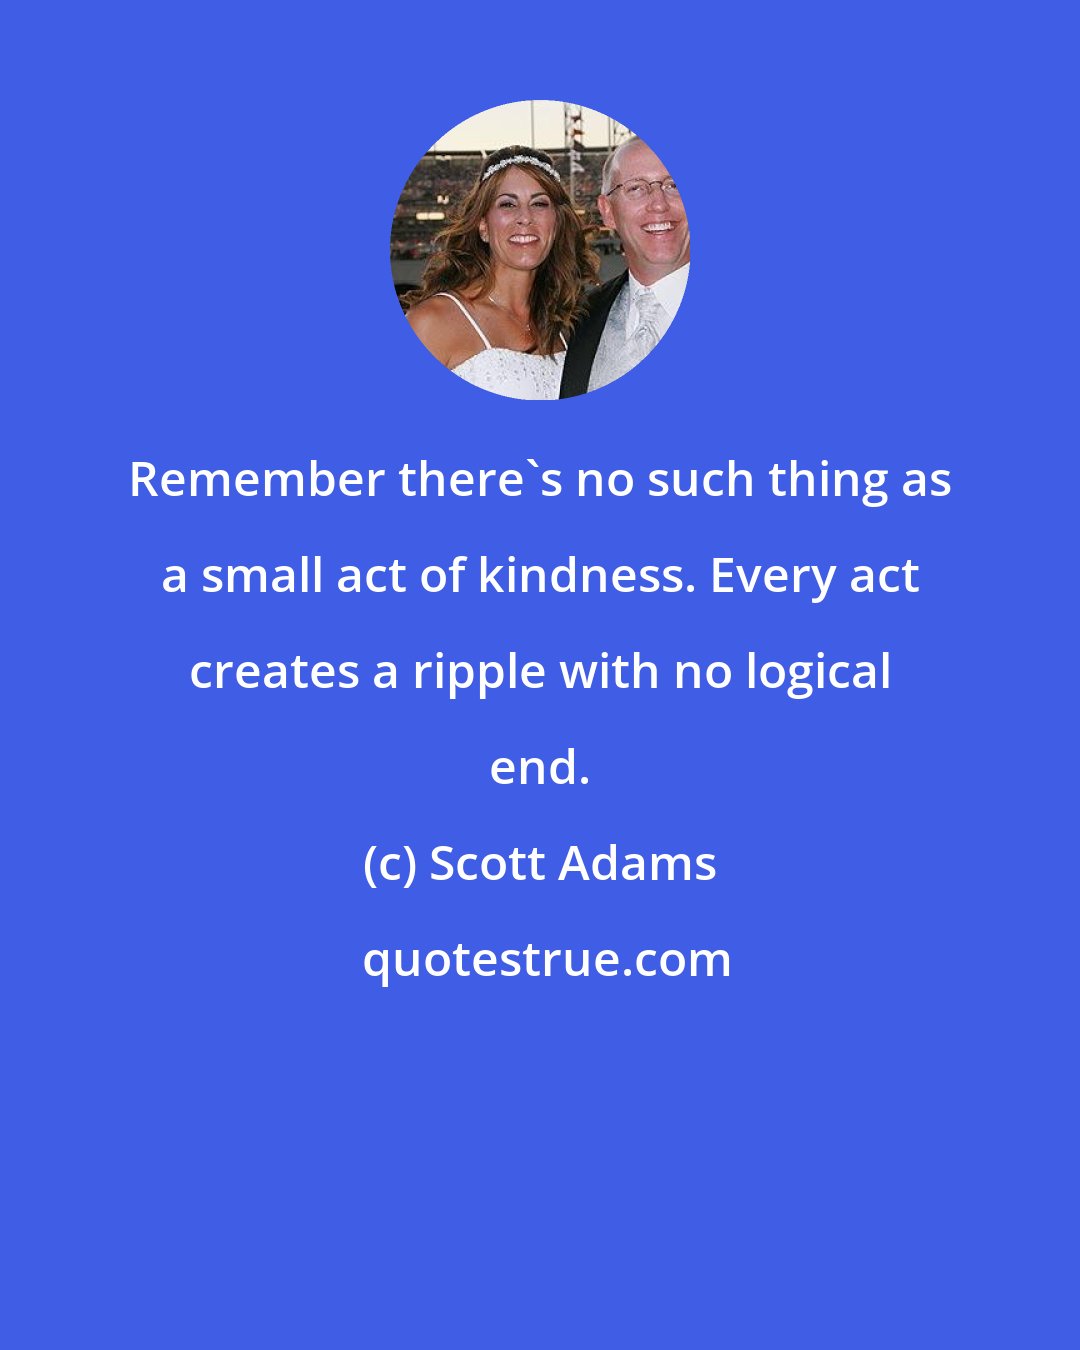 Scott Adams: Remember there's no such thing as a small act of kindness. Every act creates a ripple with no logical end.